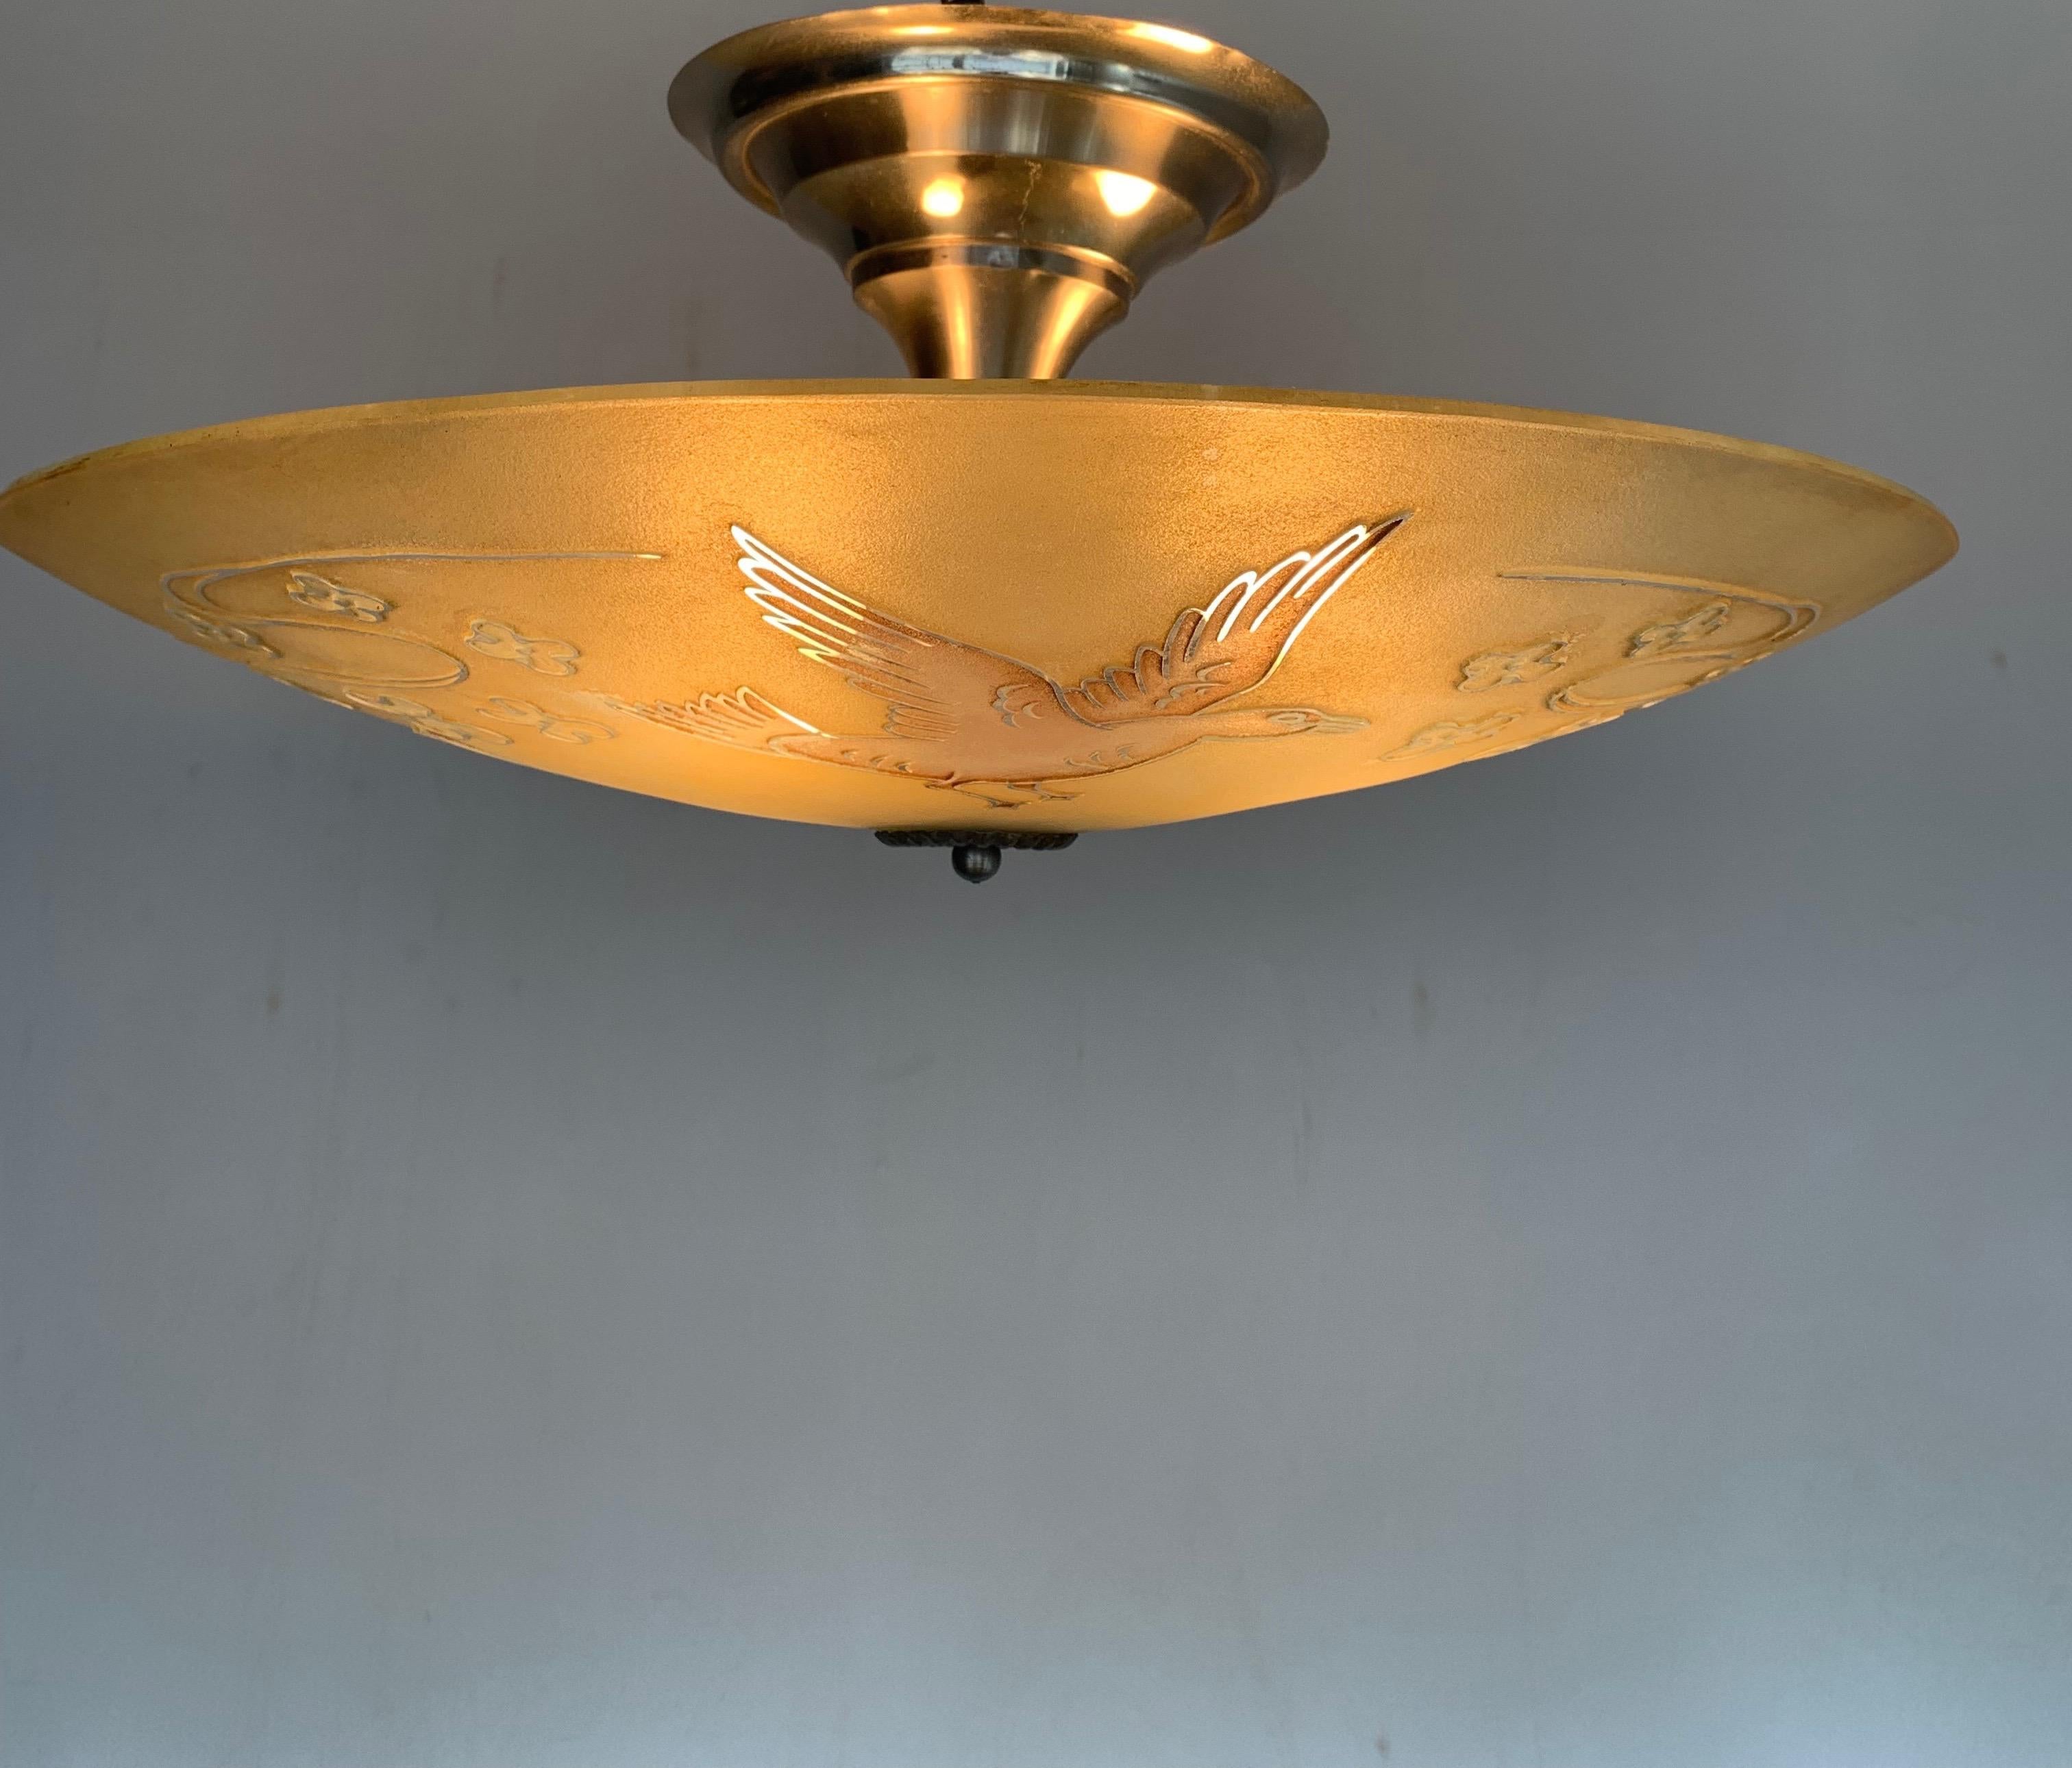 Impressive art glass pendant light with dove sculptures in relief.

This 1950s light fixture is another great example of the workmanship that you no longer see in modern society. Fortunately former owners took really good care of this delightful and